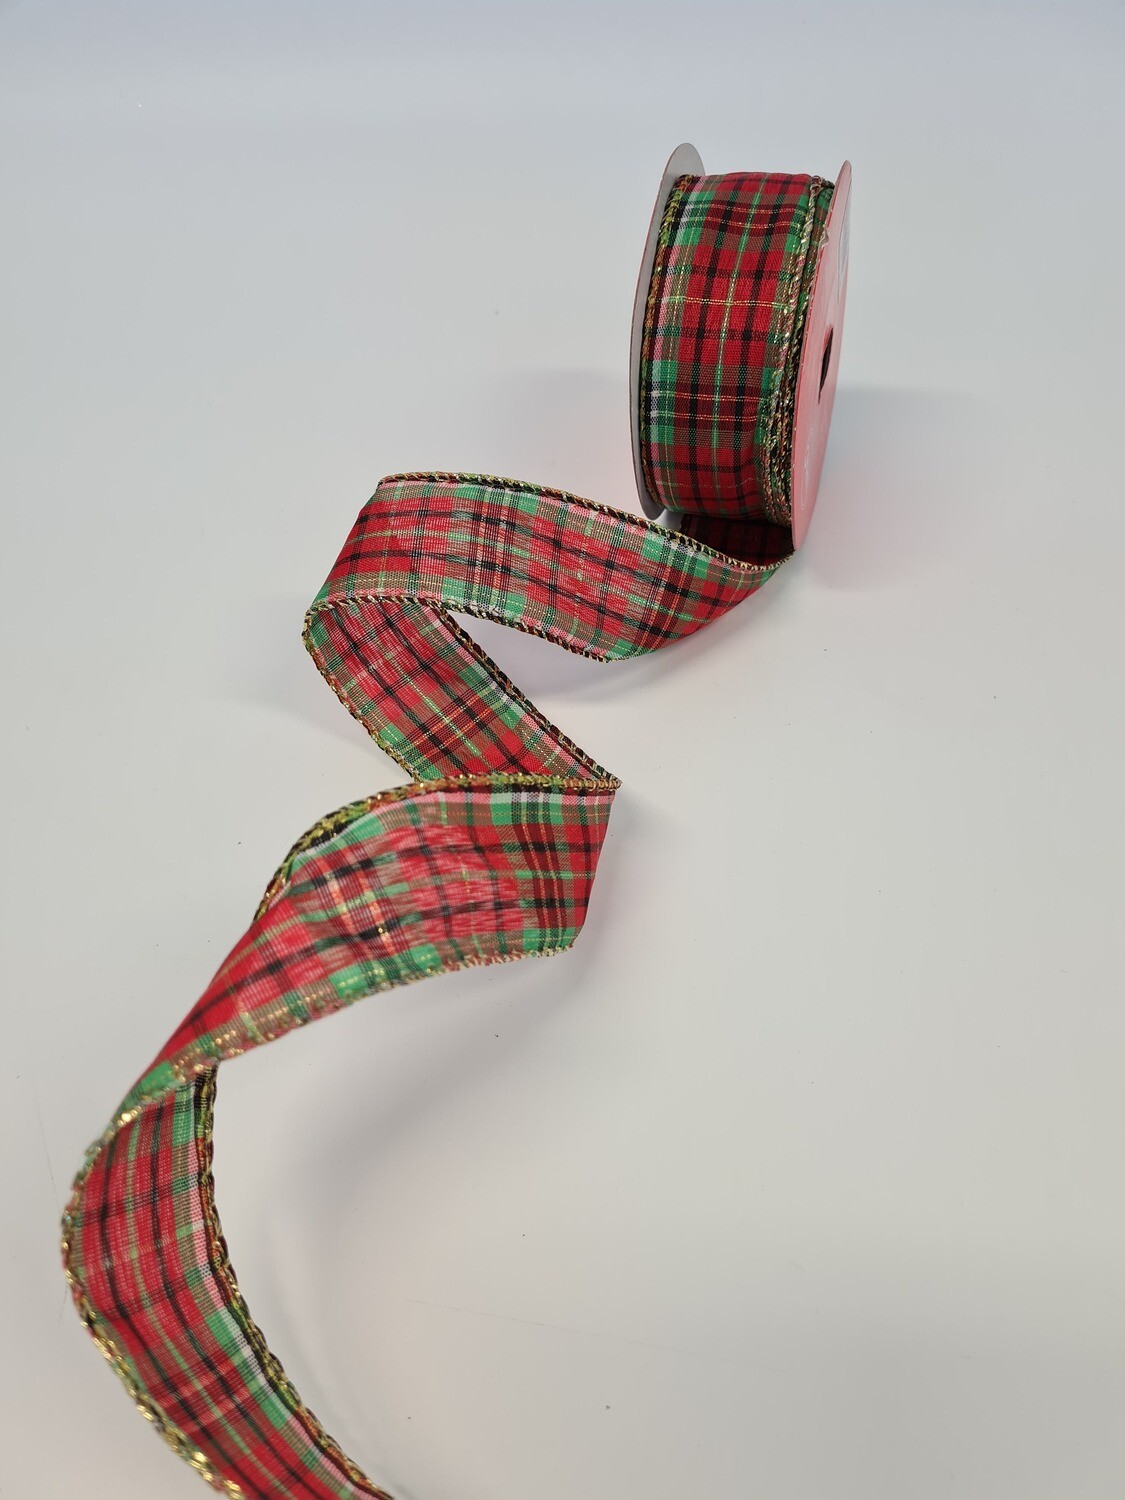 Red and Green Tartan